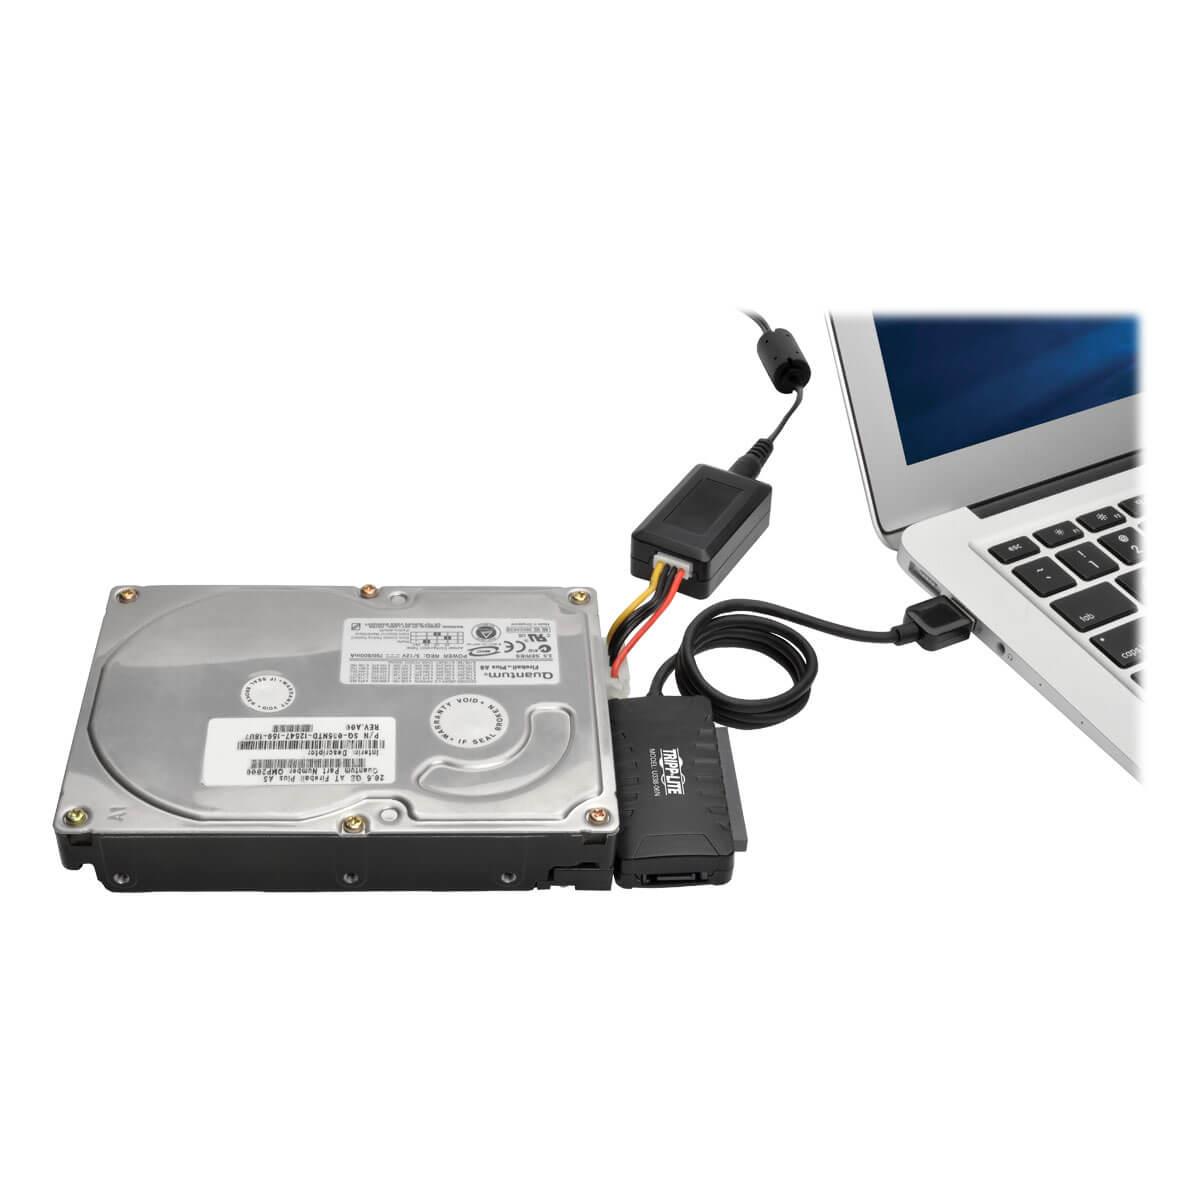 USB 3.0 SuperSpeed External 2.5 in. SATA Hard Drive Enclosure with Built-In  Cable and UASP Support